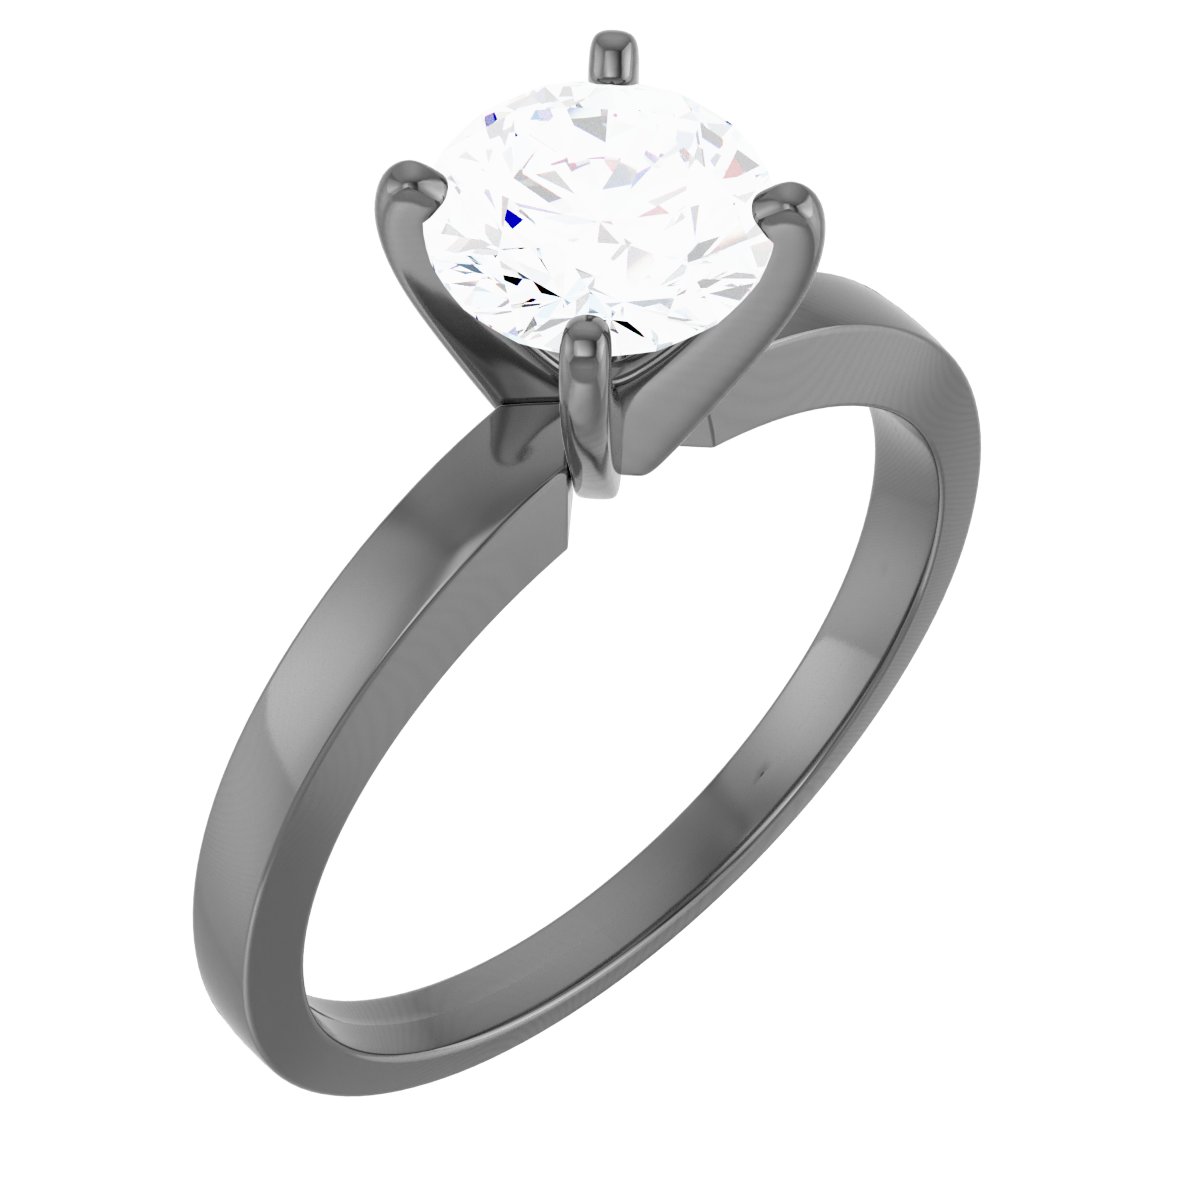 Round 4-Prong Tall & Heavy Solitaire Ring Mounting